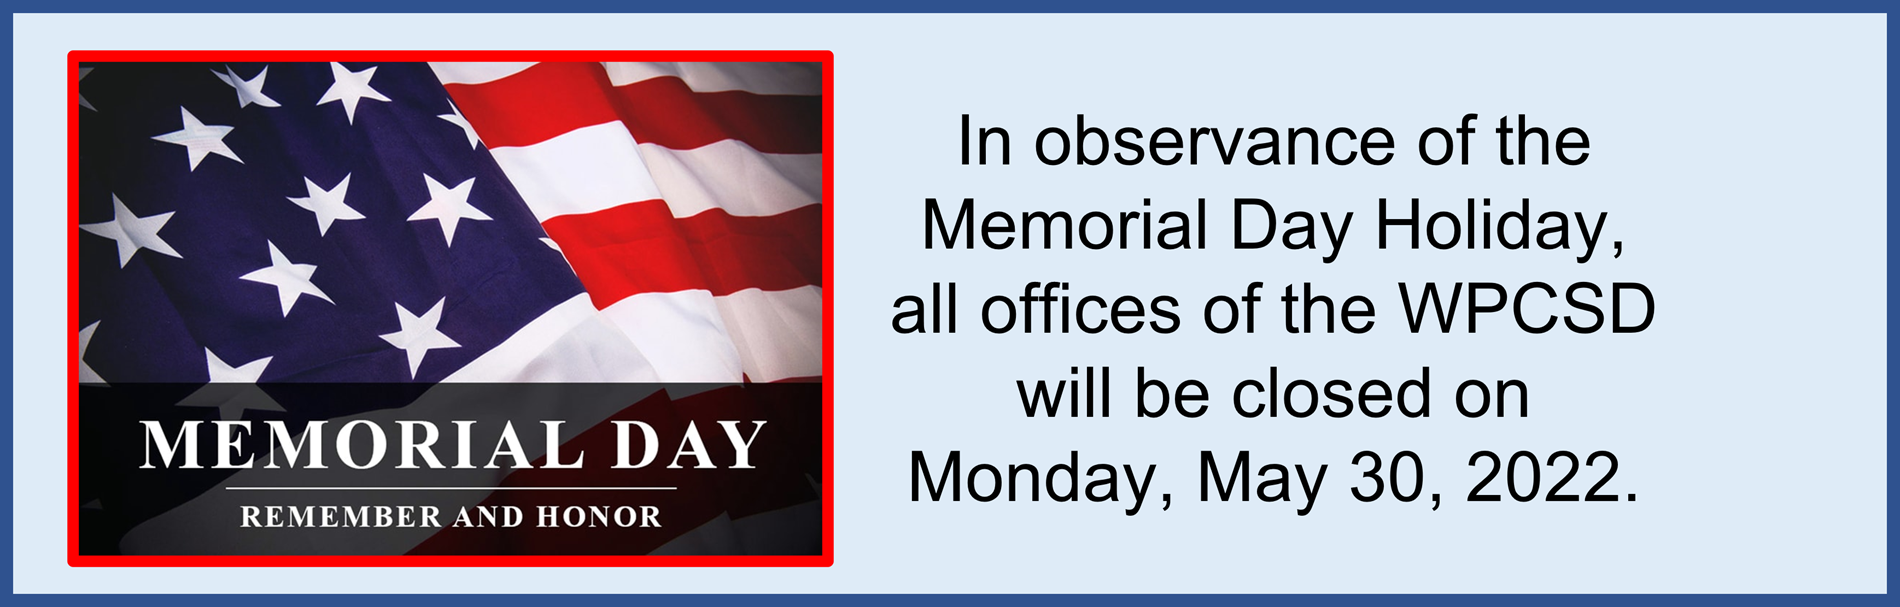 memorial day holiday